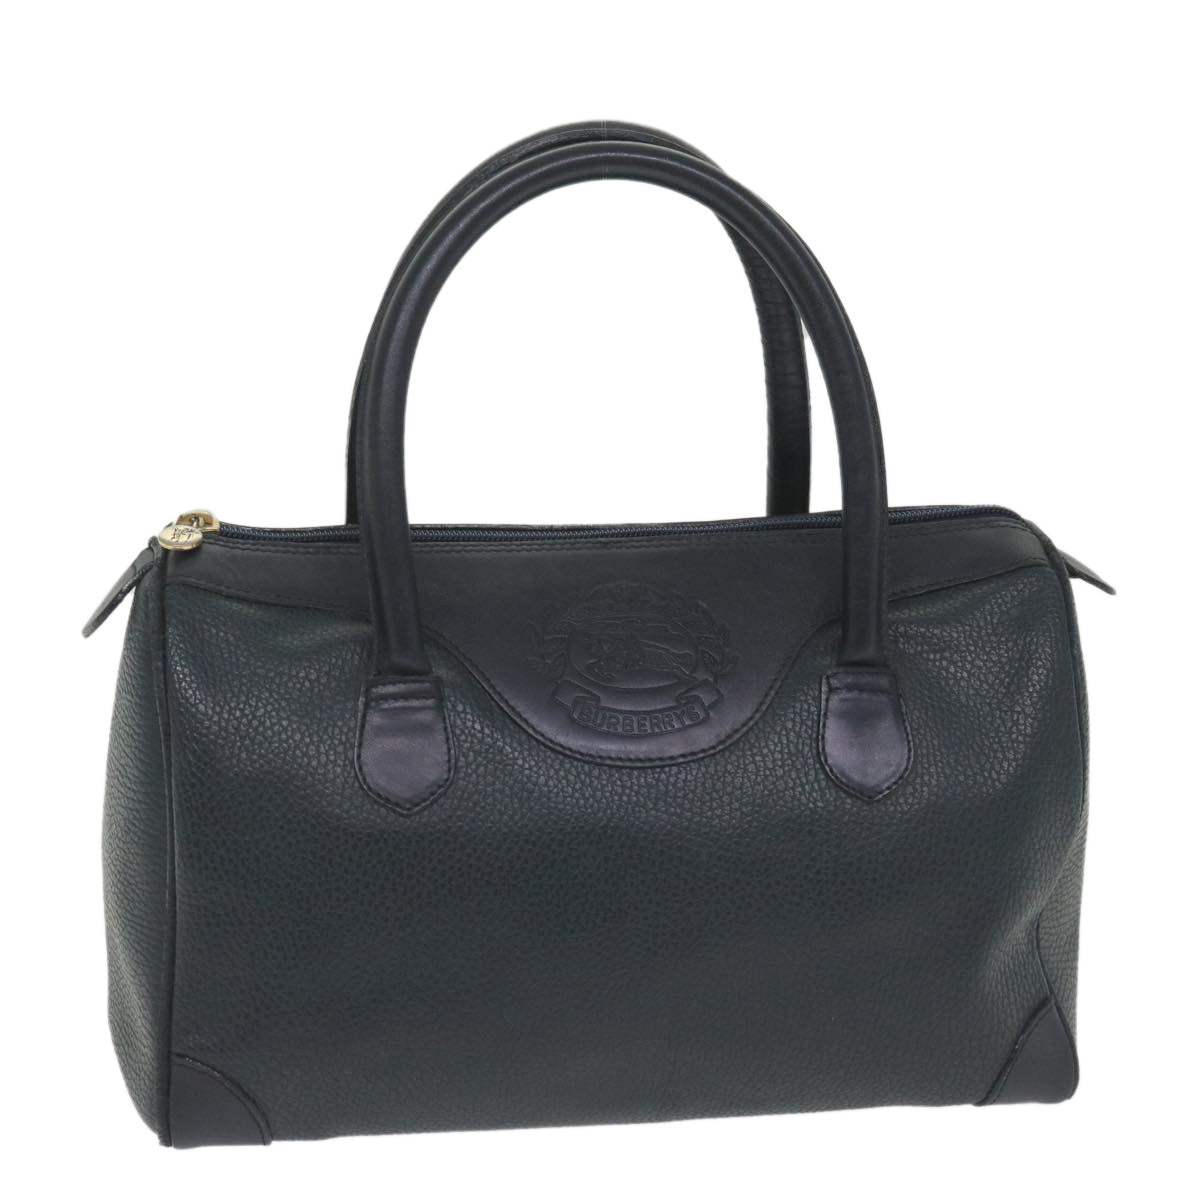 Burberrys Boston Bag Leather Navy Auth bs9816